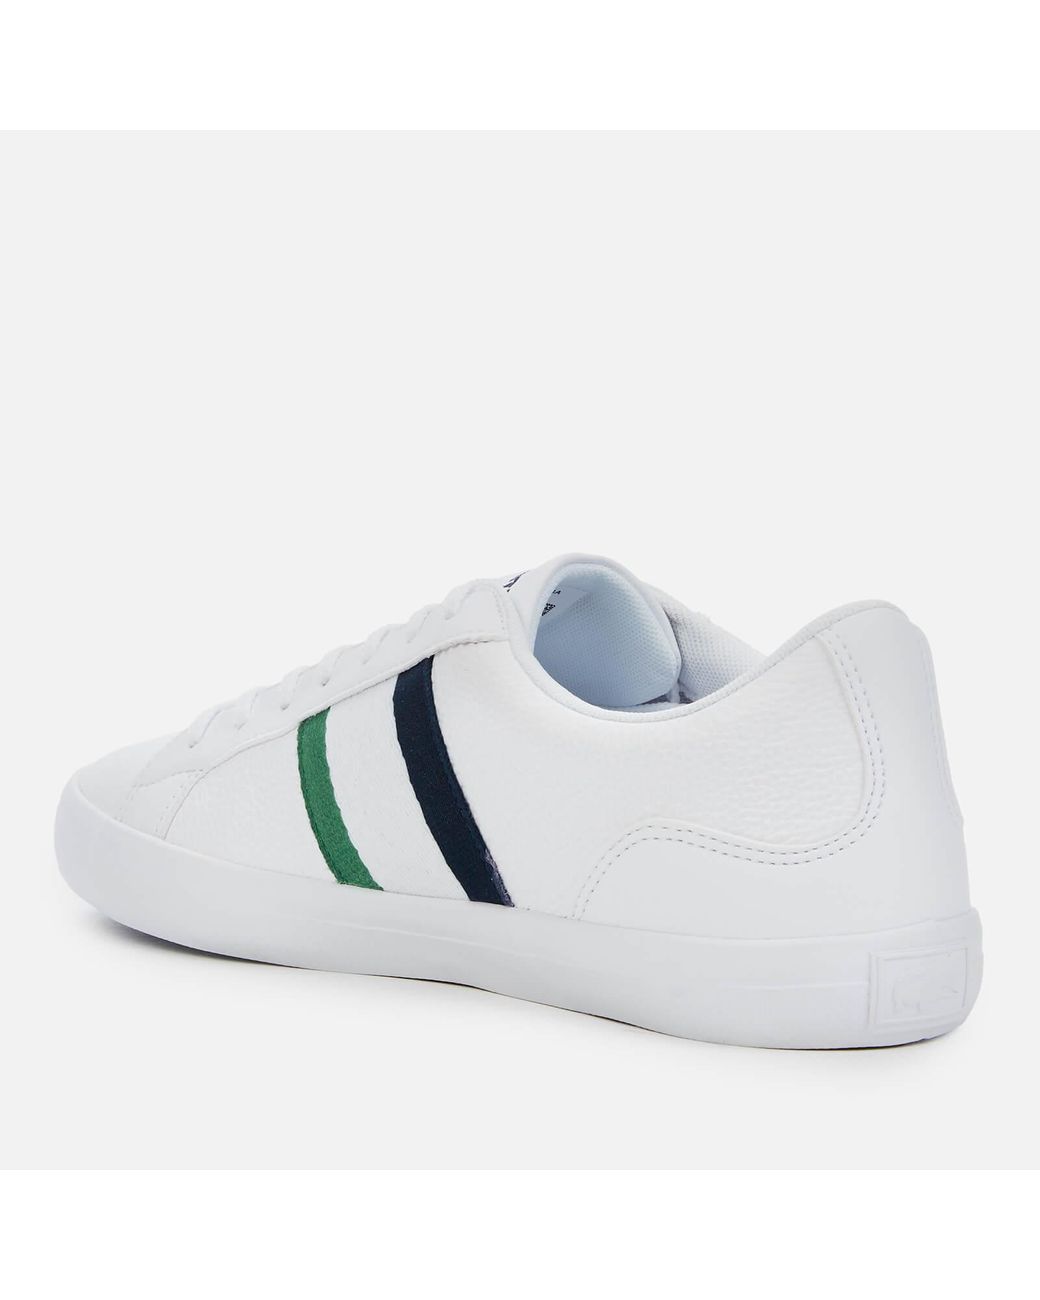 Lacoste Lerond 119 3 Leather Low Top Trainers in White for Men - Lyst